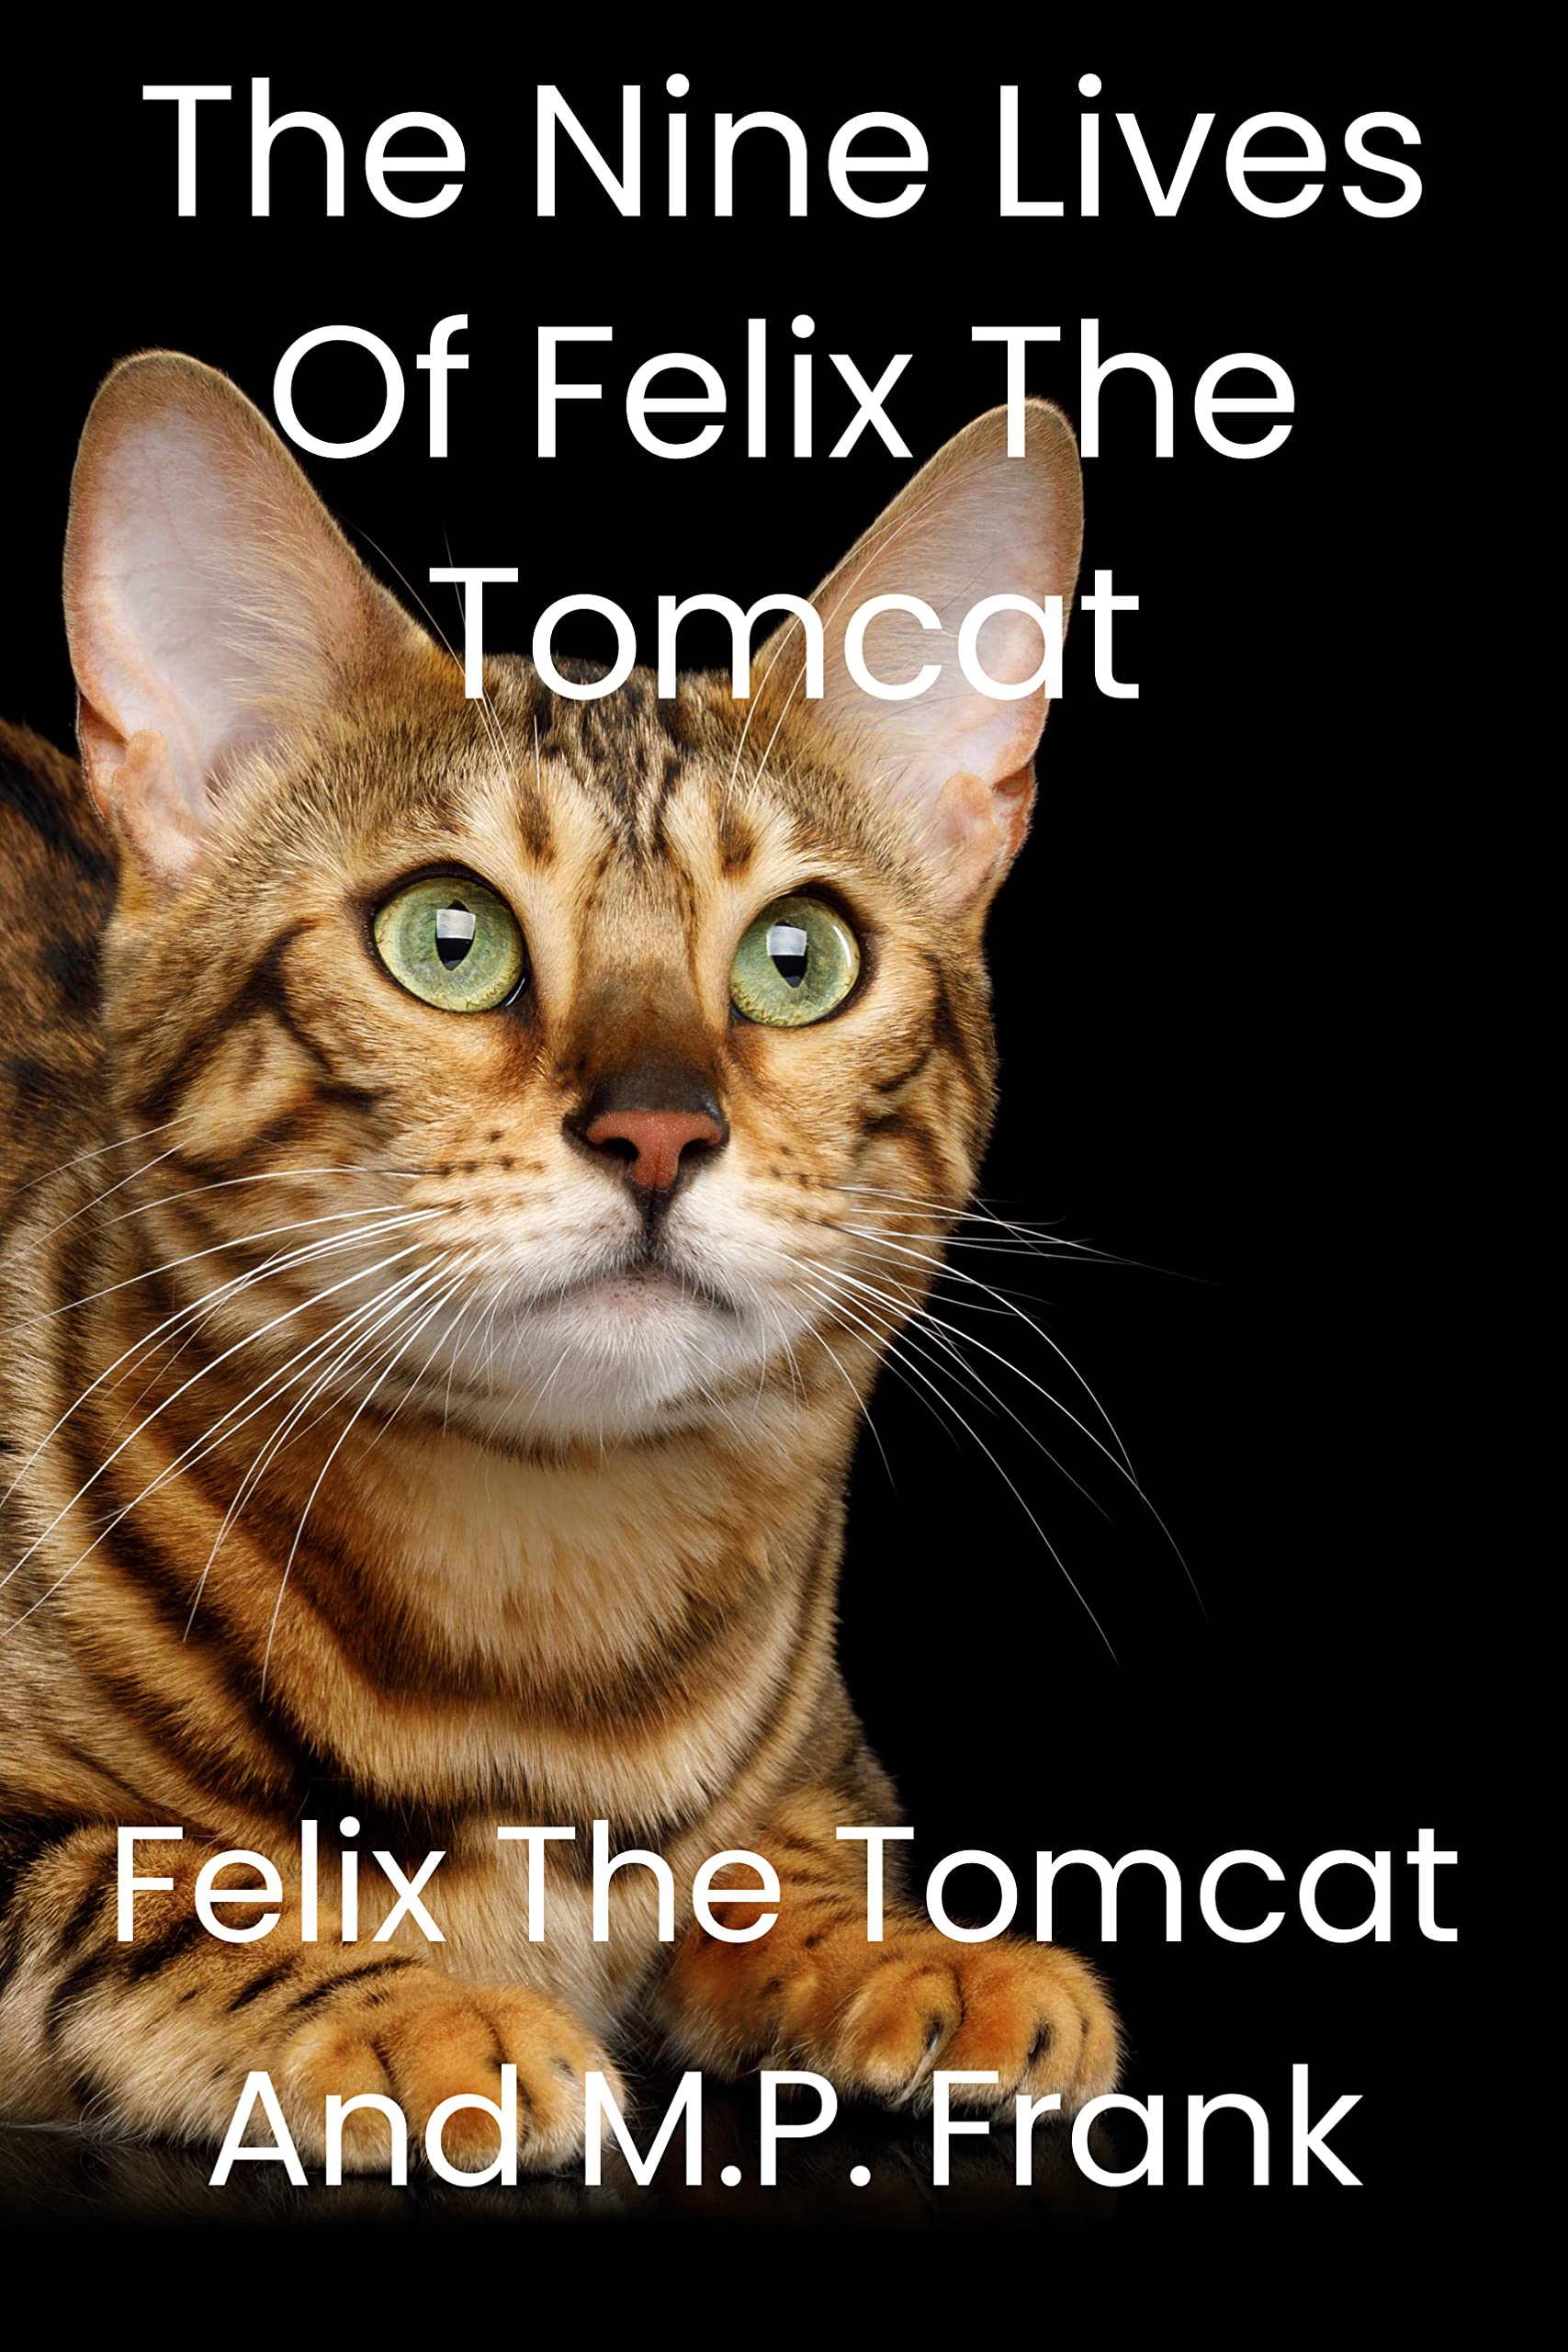 The Nine Lives of Felix the Tomcat by by M.P. Frank